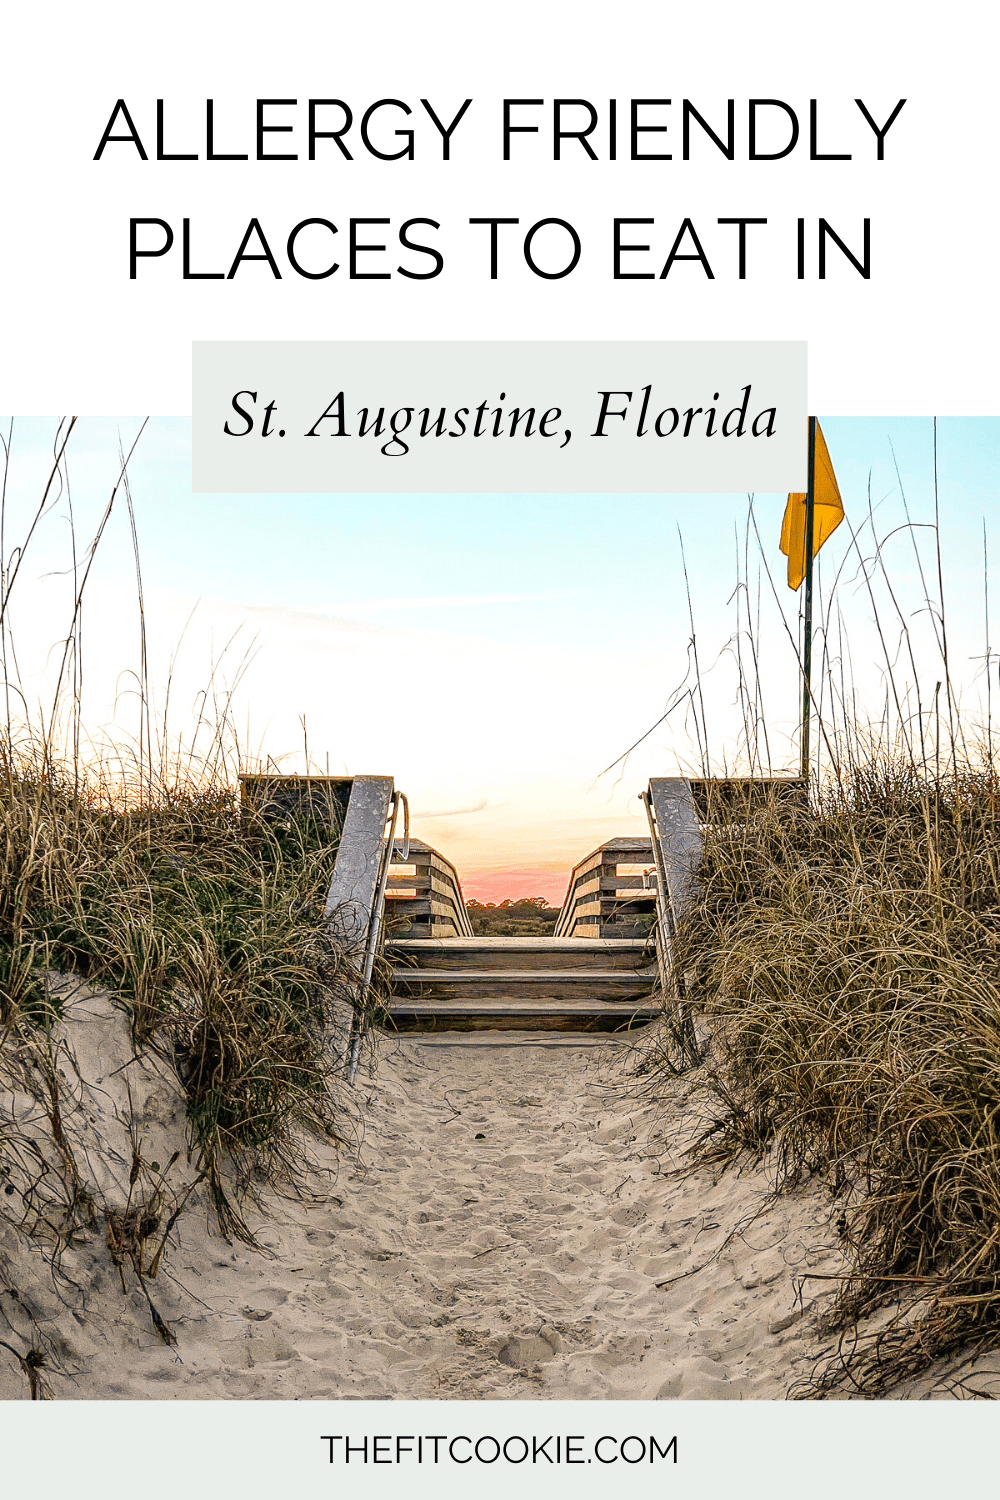 photo of florida beach steps with text overlay that says "allergy friendly places to eat in st. augustine, florida". 